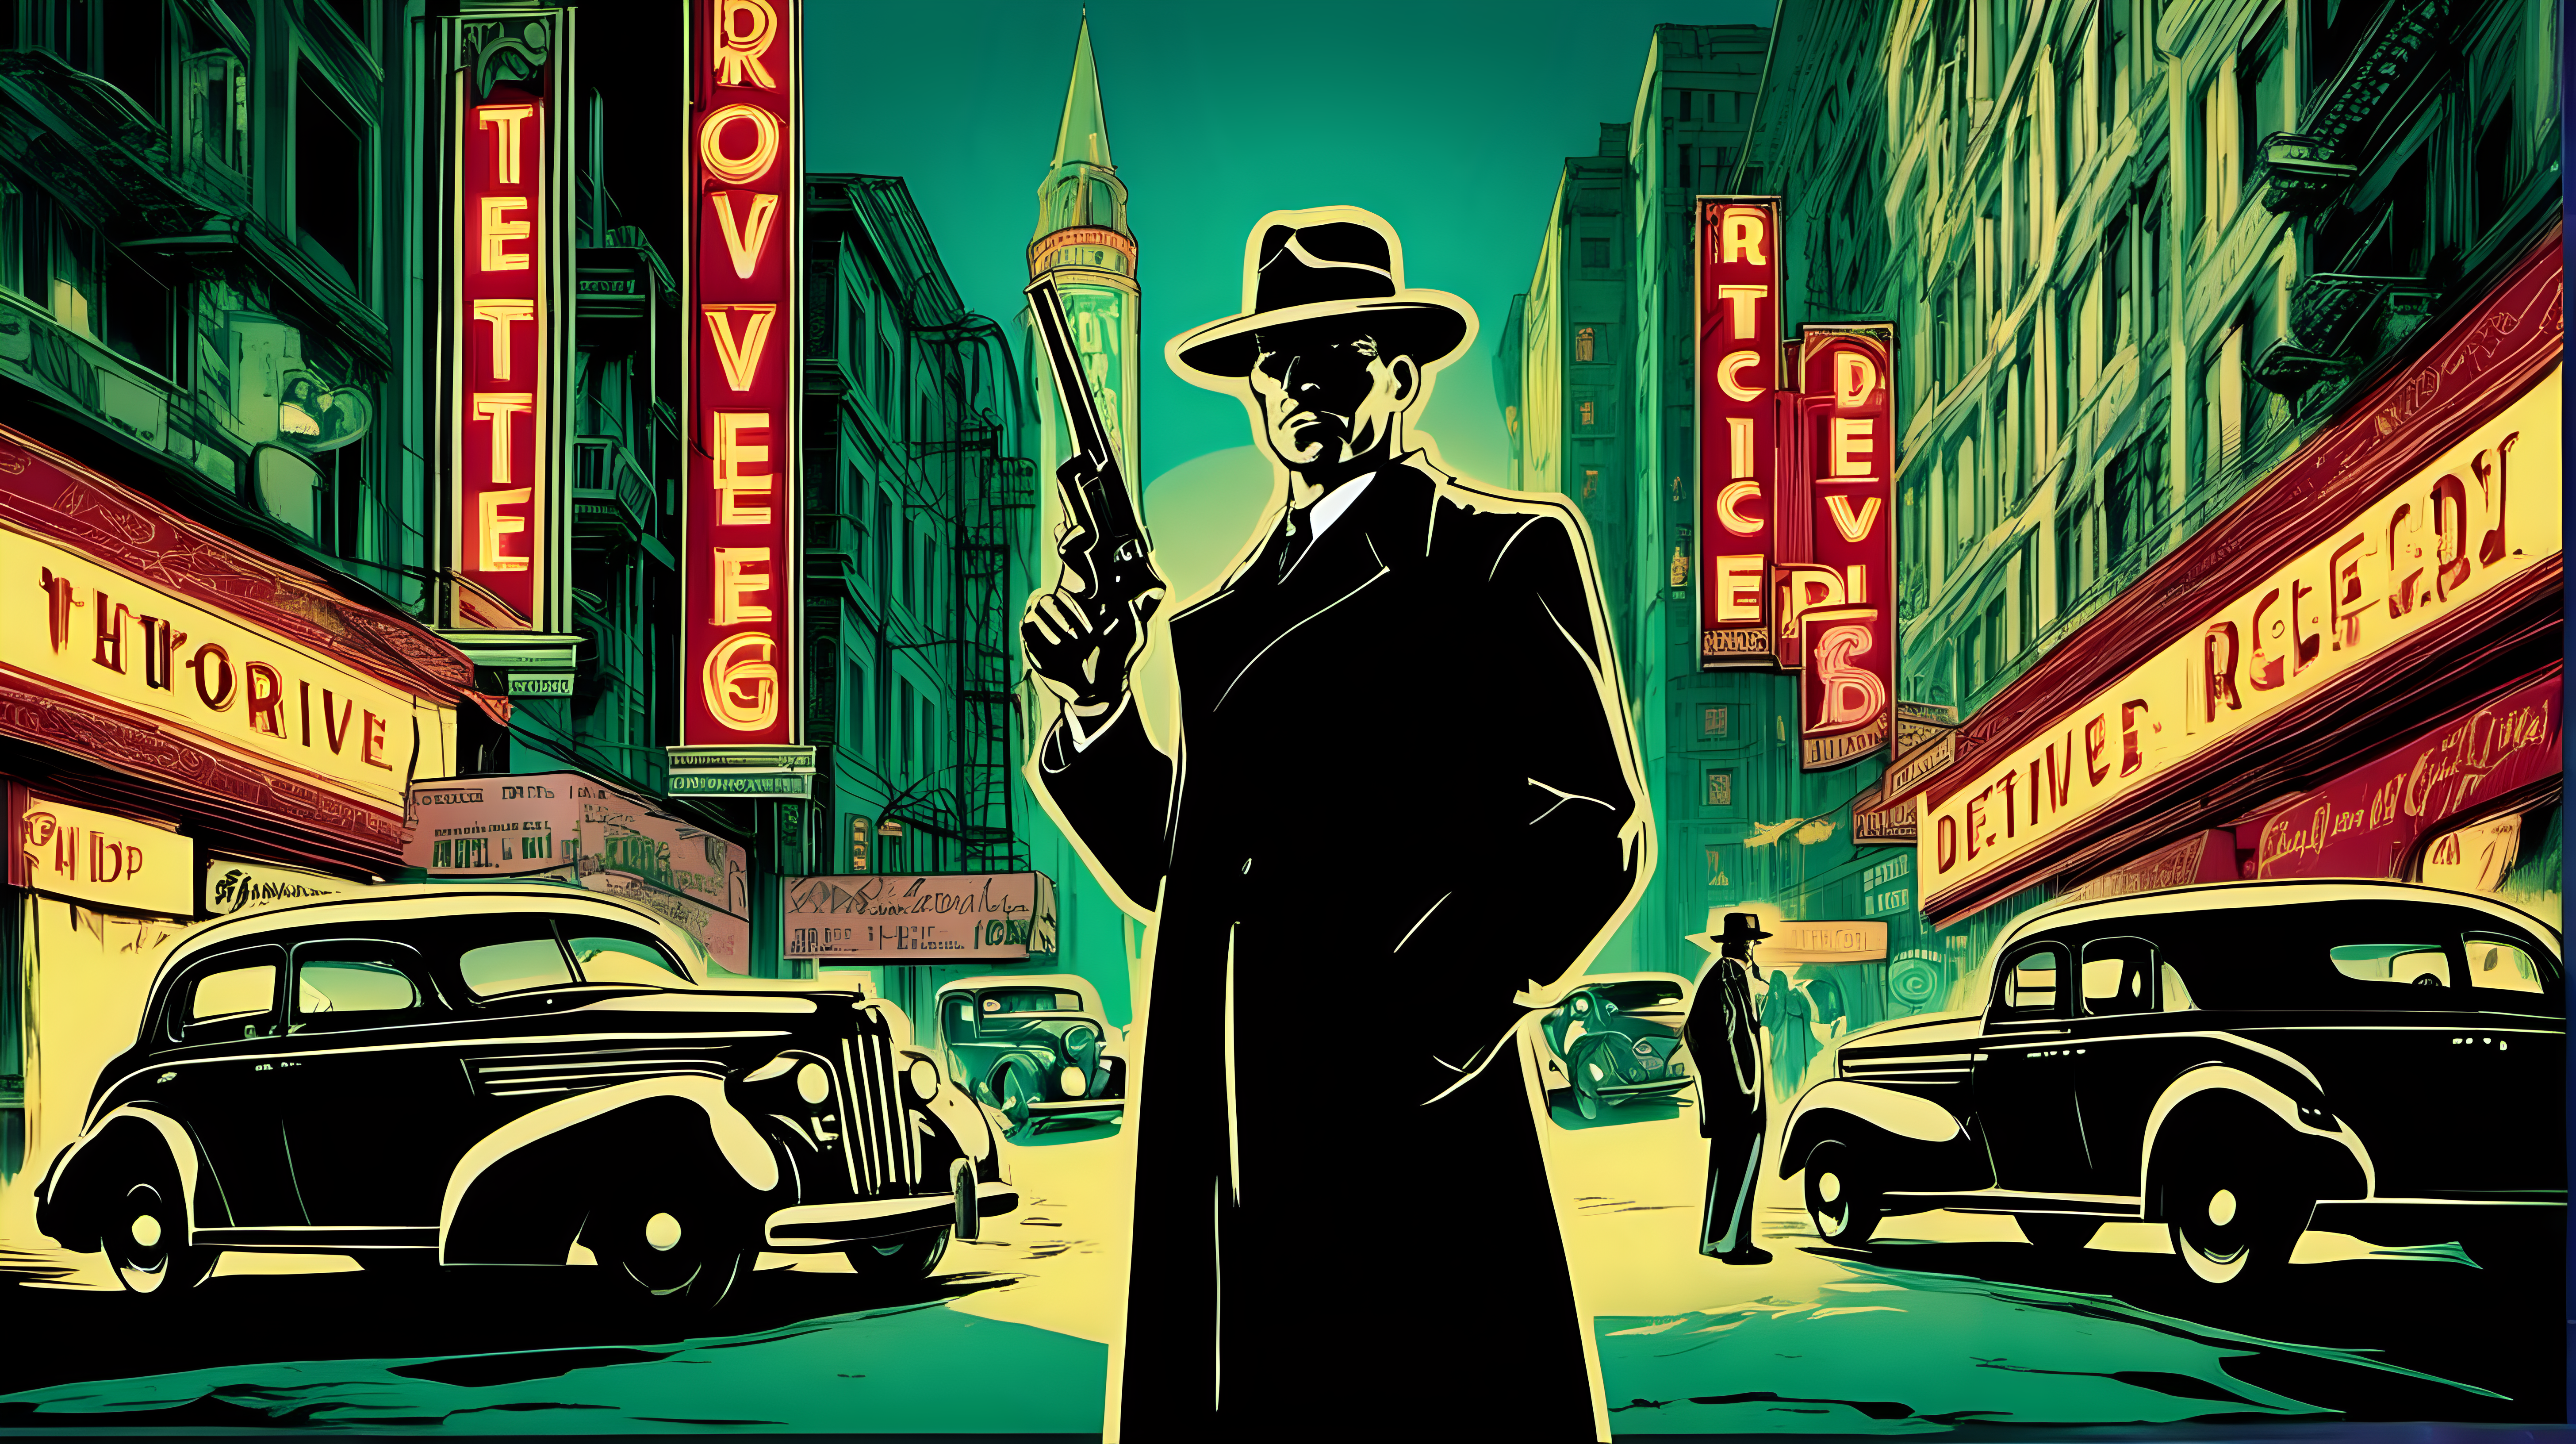 A detective with a revolver standing in the foreground on a downtown San Francisco street circa 1940, neon signs, looking at the camera. Art Nouveau style.